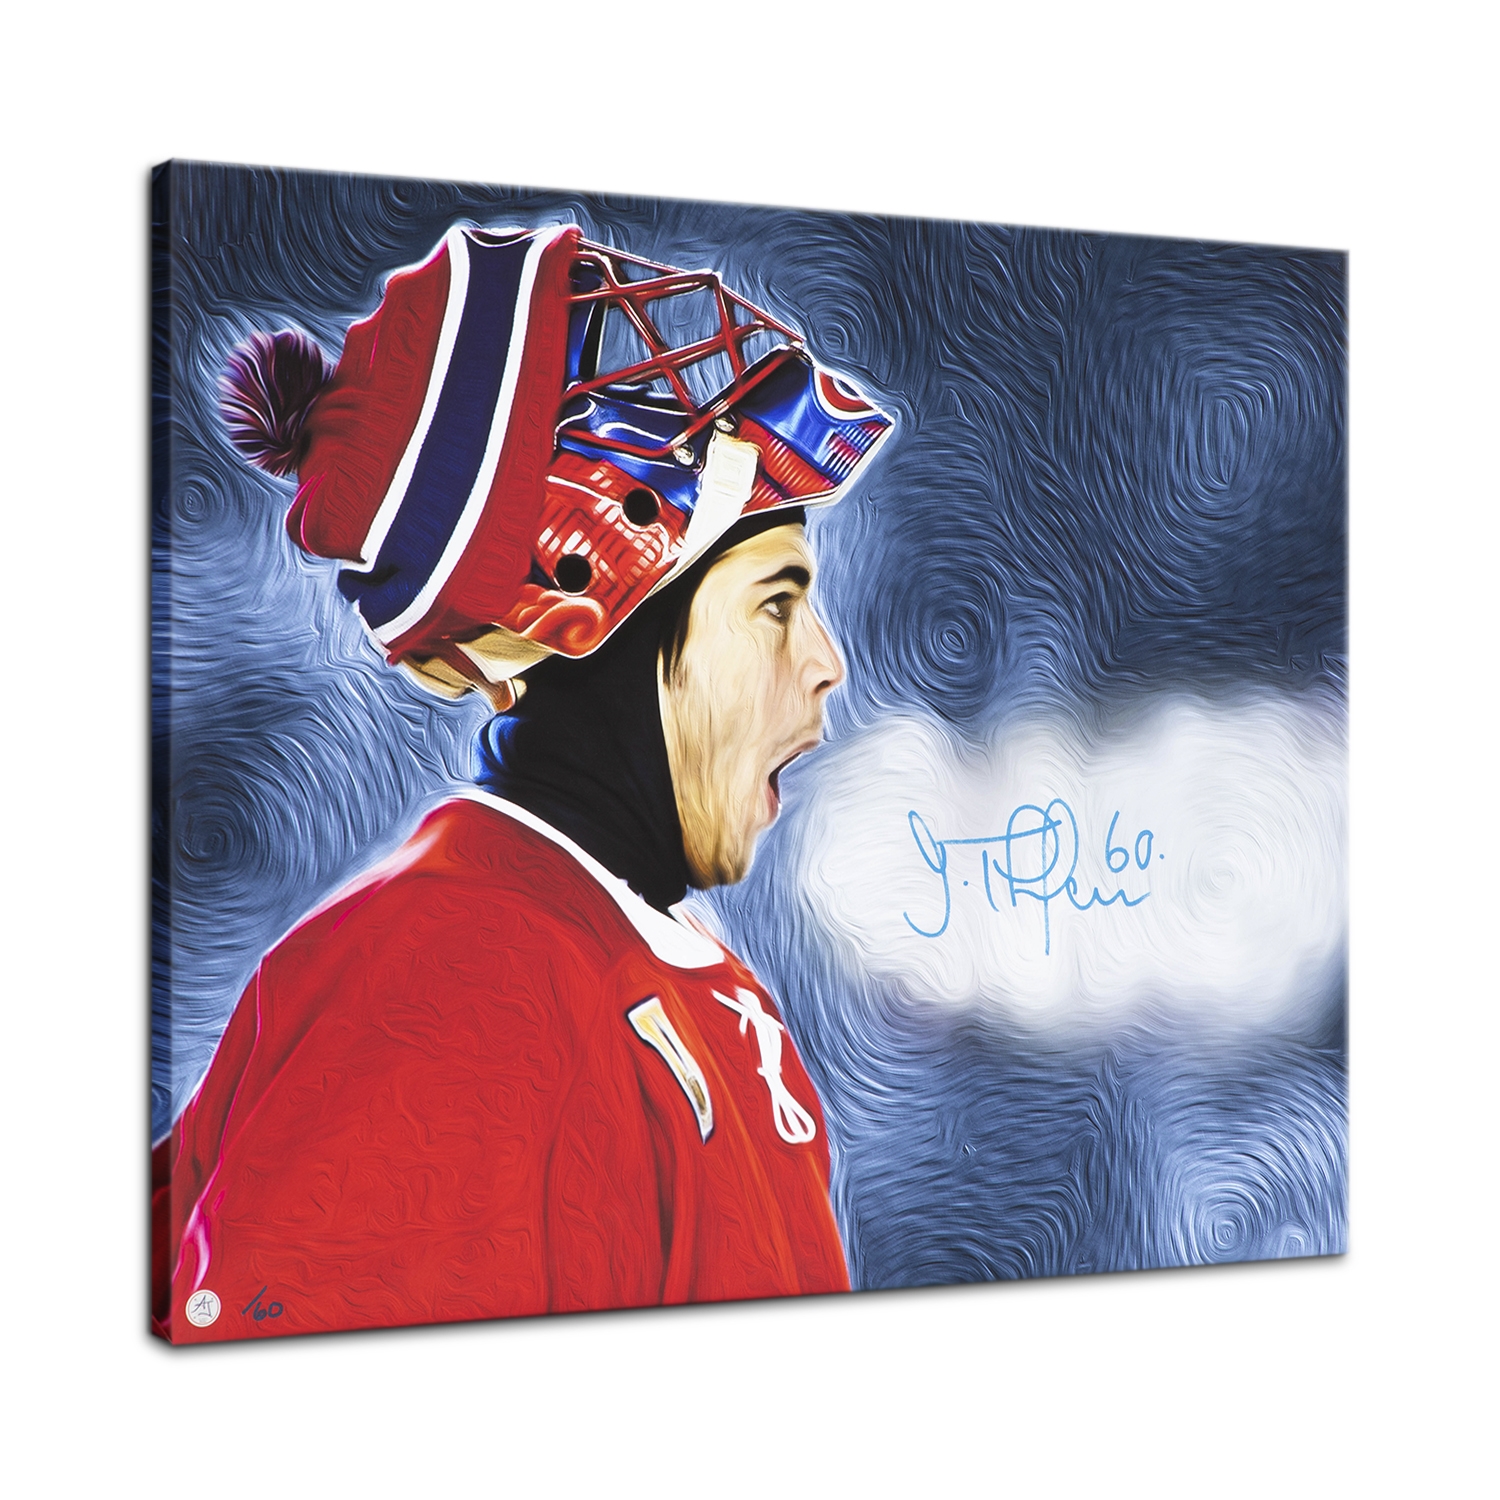 Jose Theodore Signed Montreal Goalie Outdoor Game Breath 26x32 Art Canvas /60